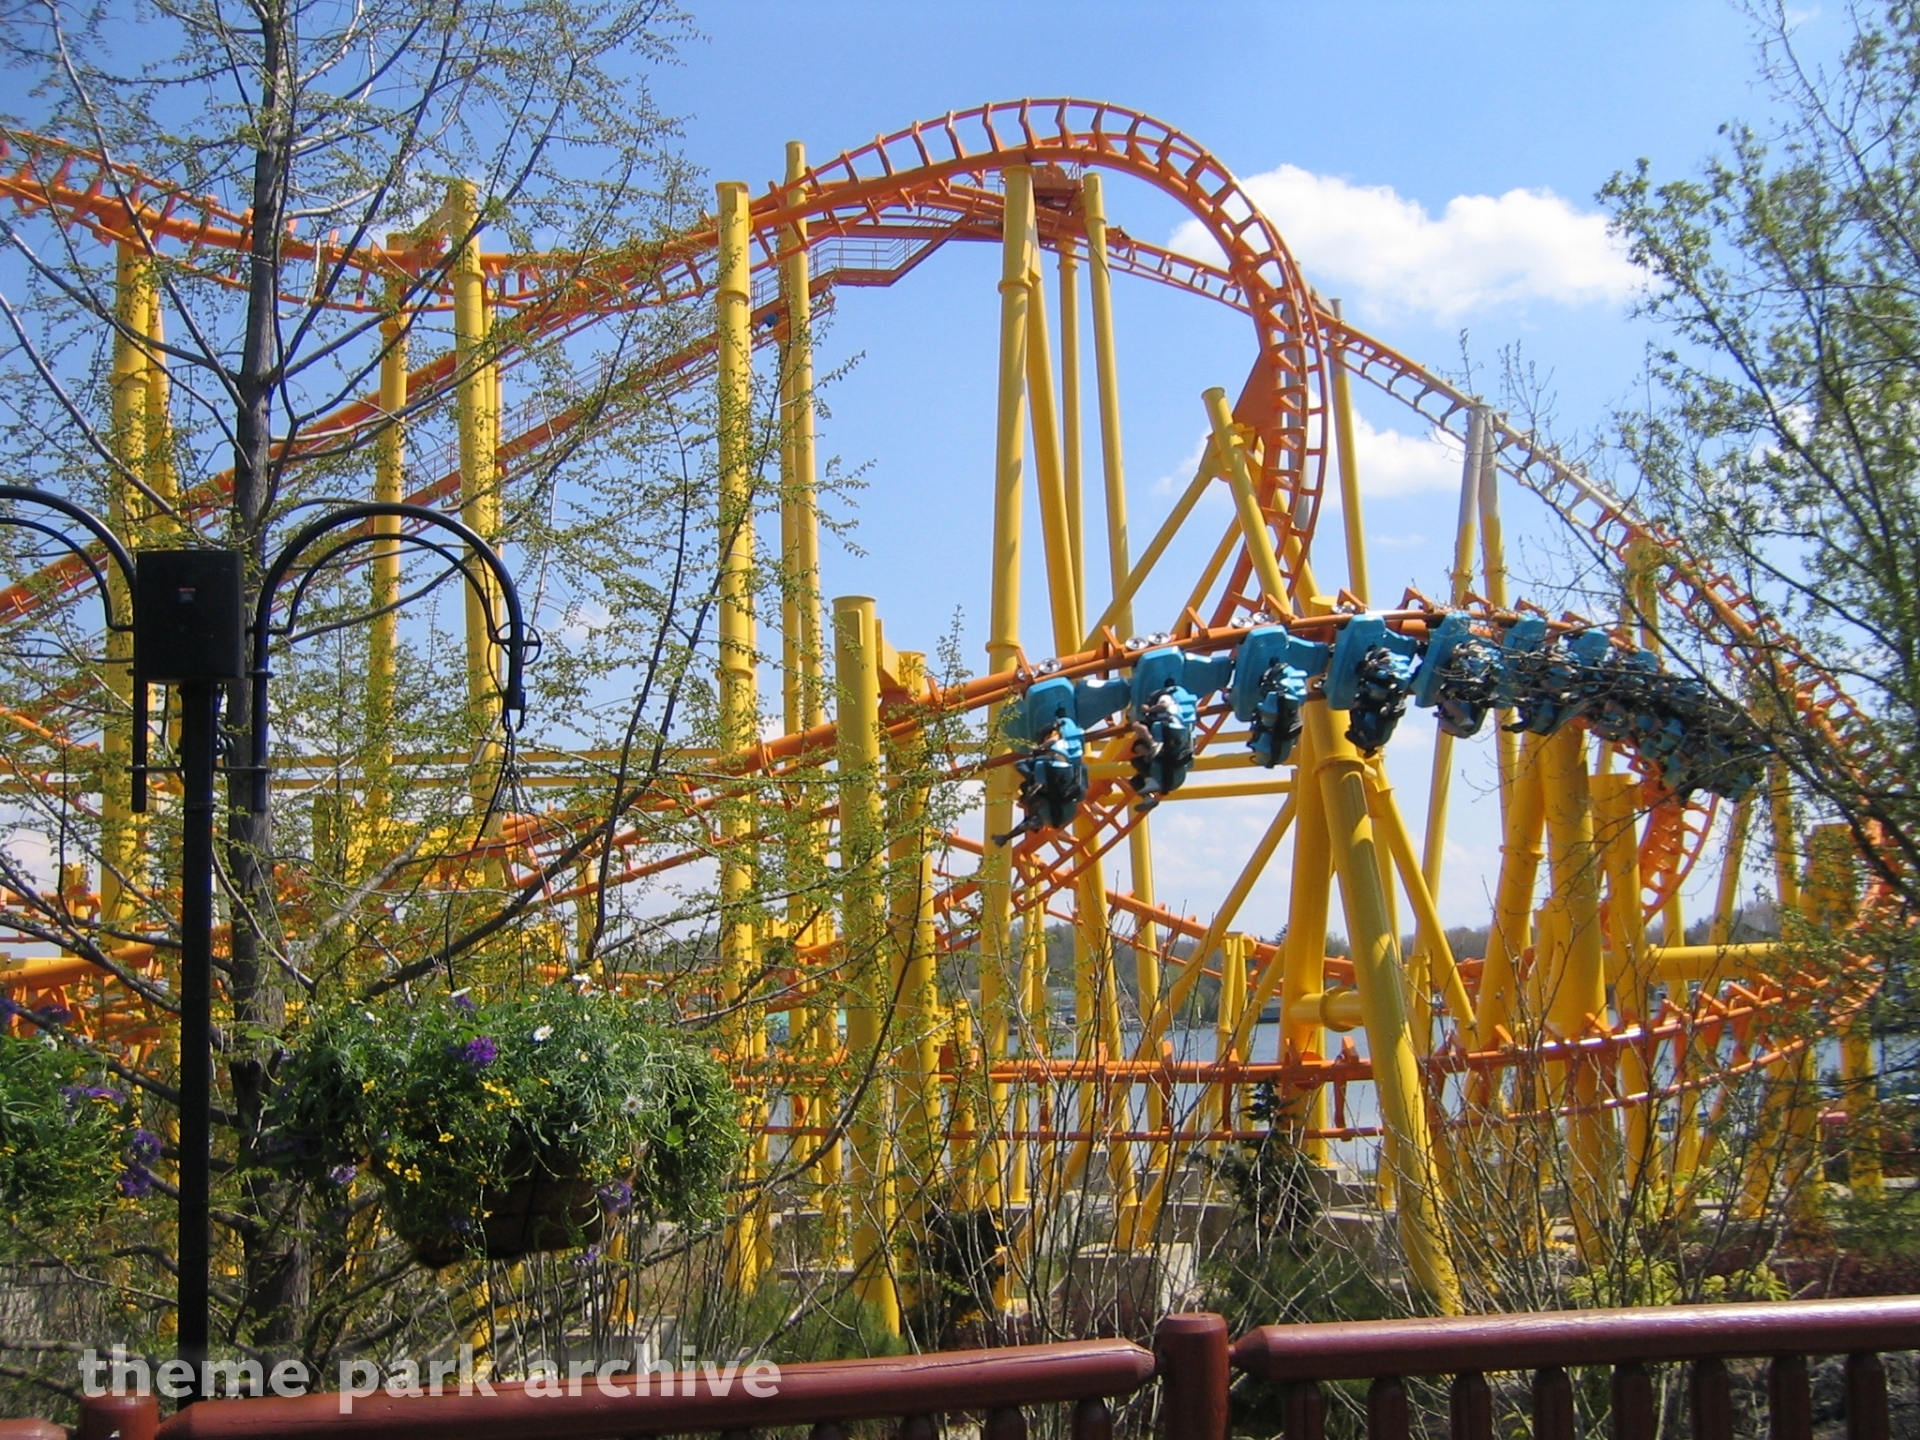 Thunderhawk at Geauga Lake | Theme Park Archive